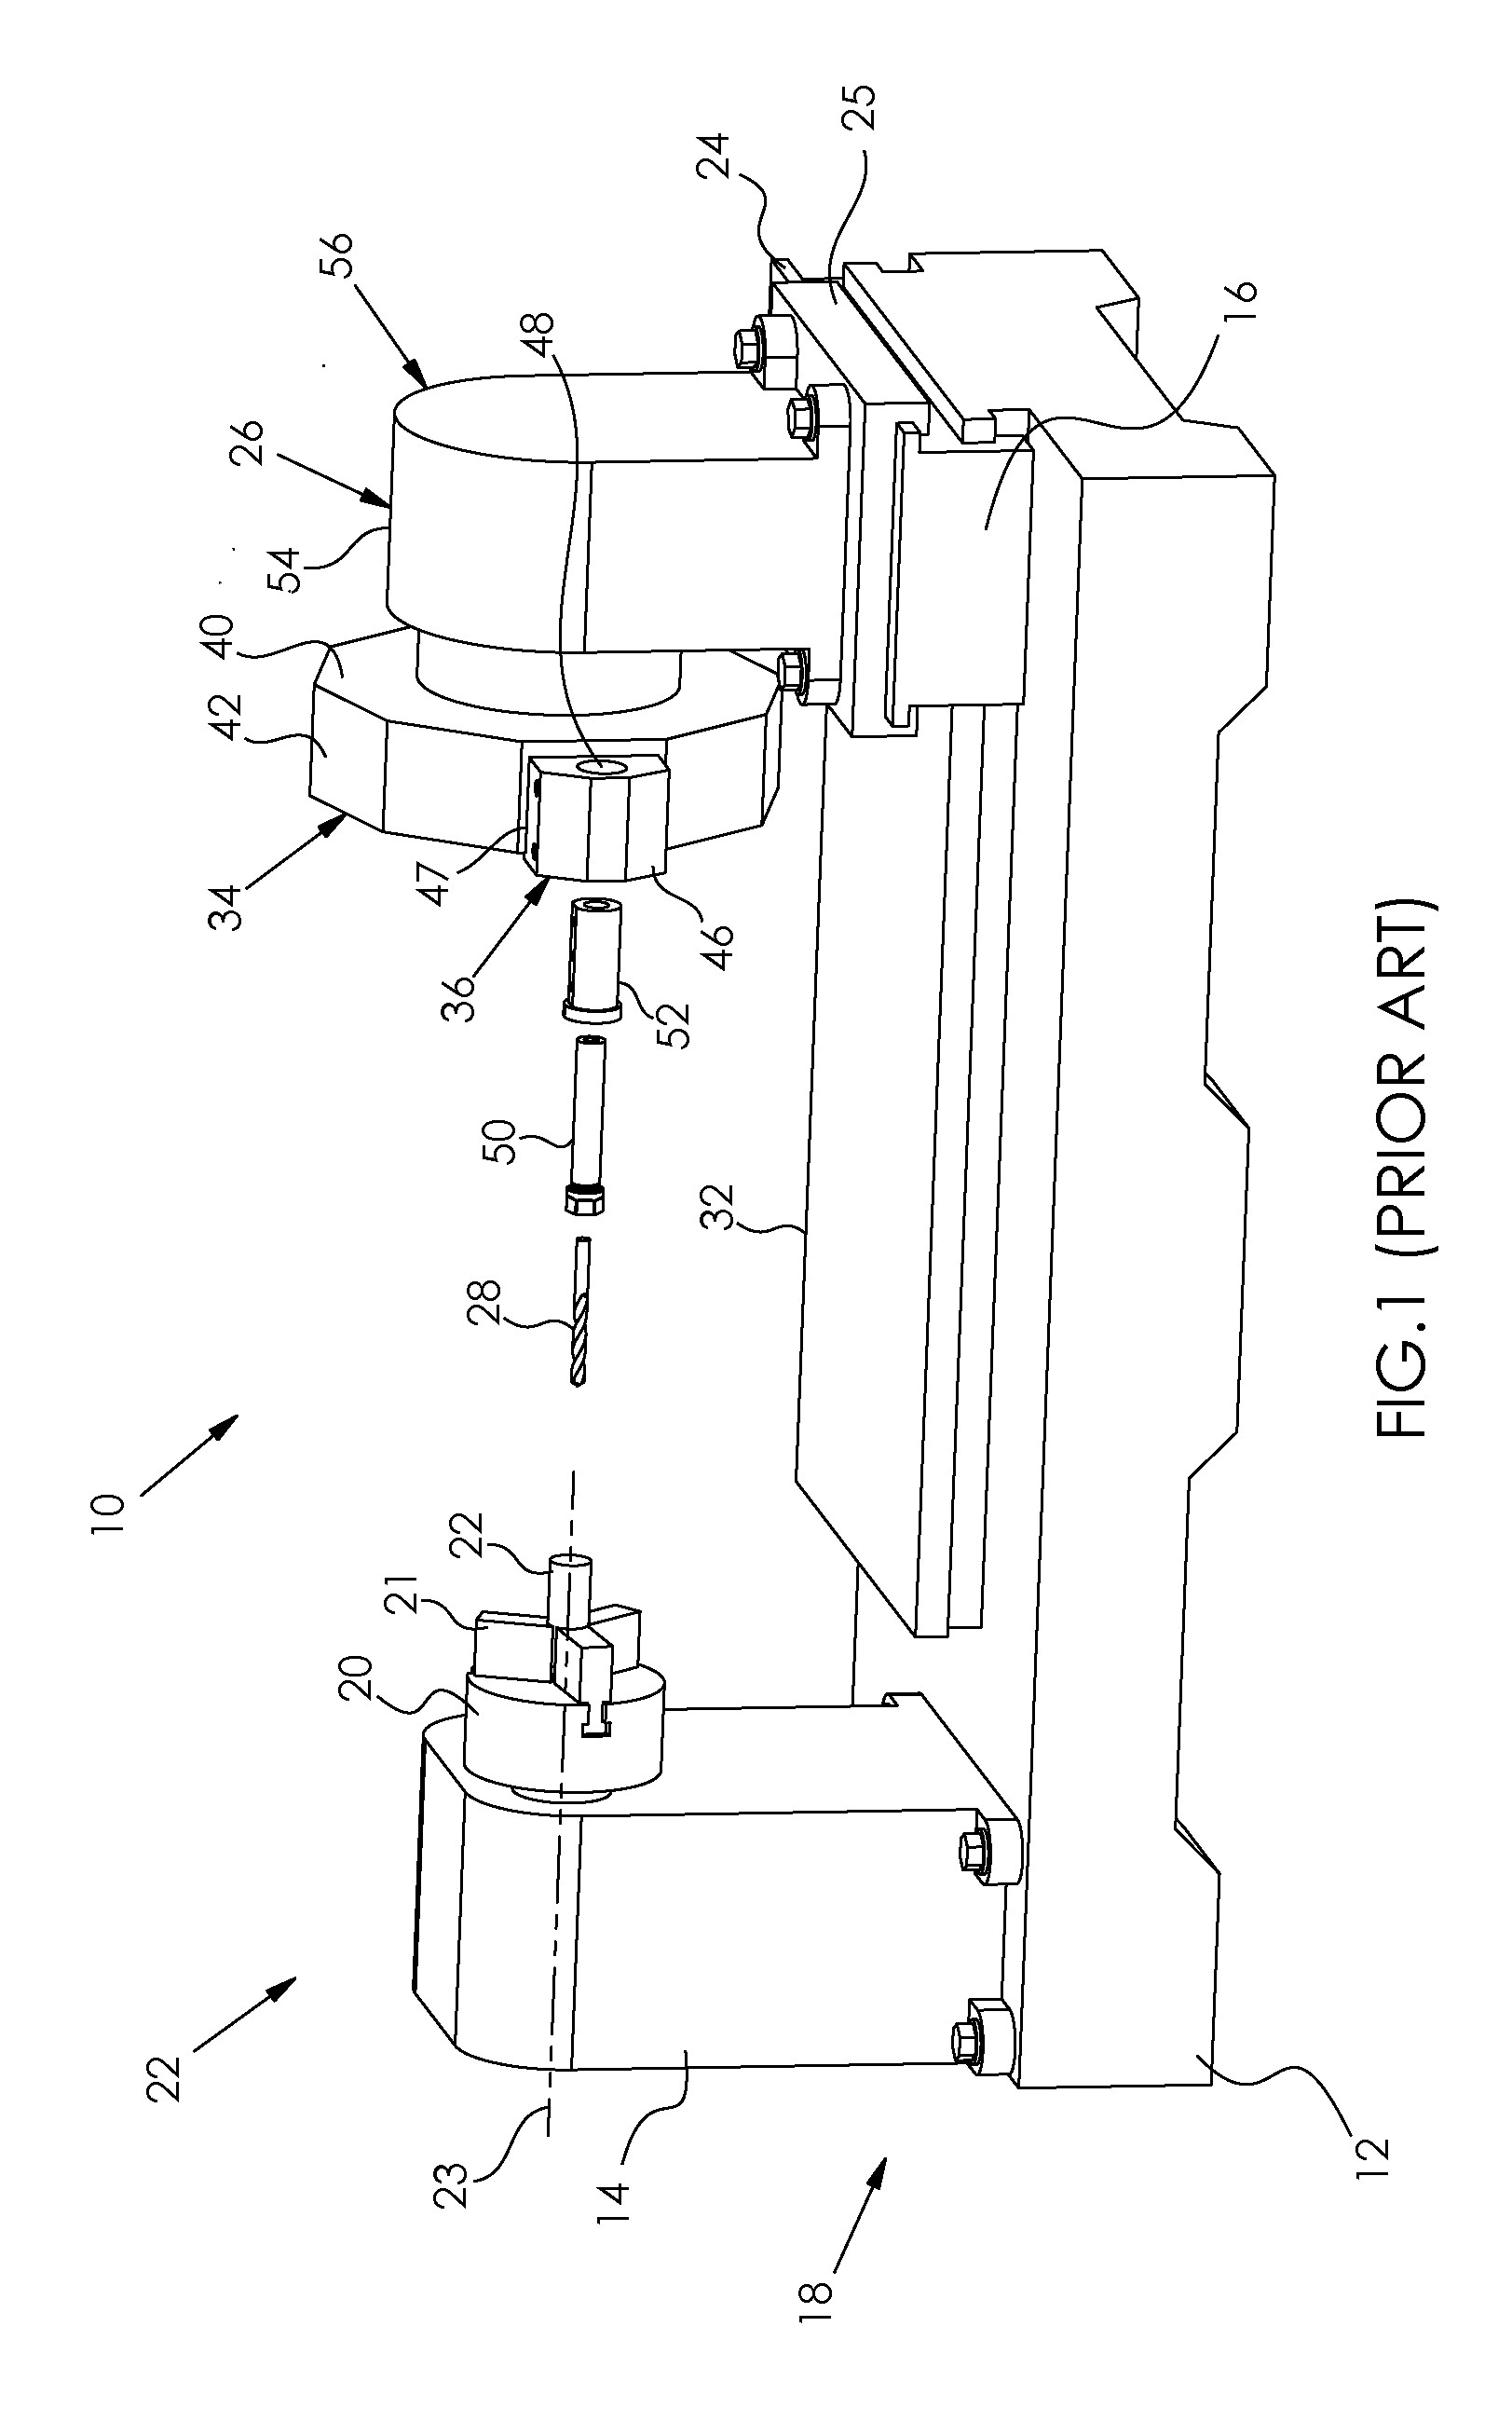 Method and apparatus for lathe tool alignment